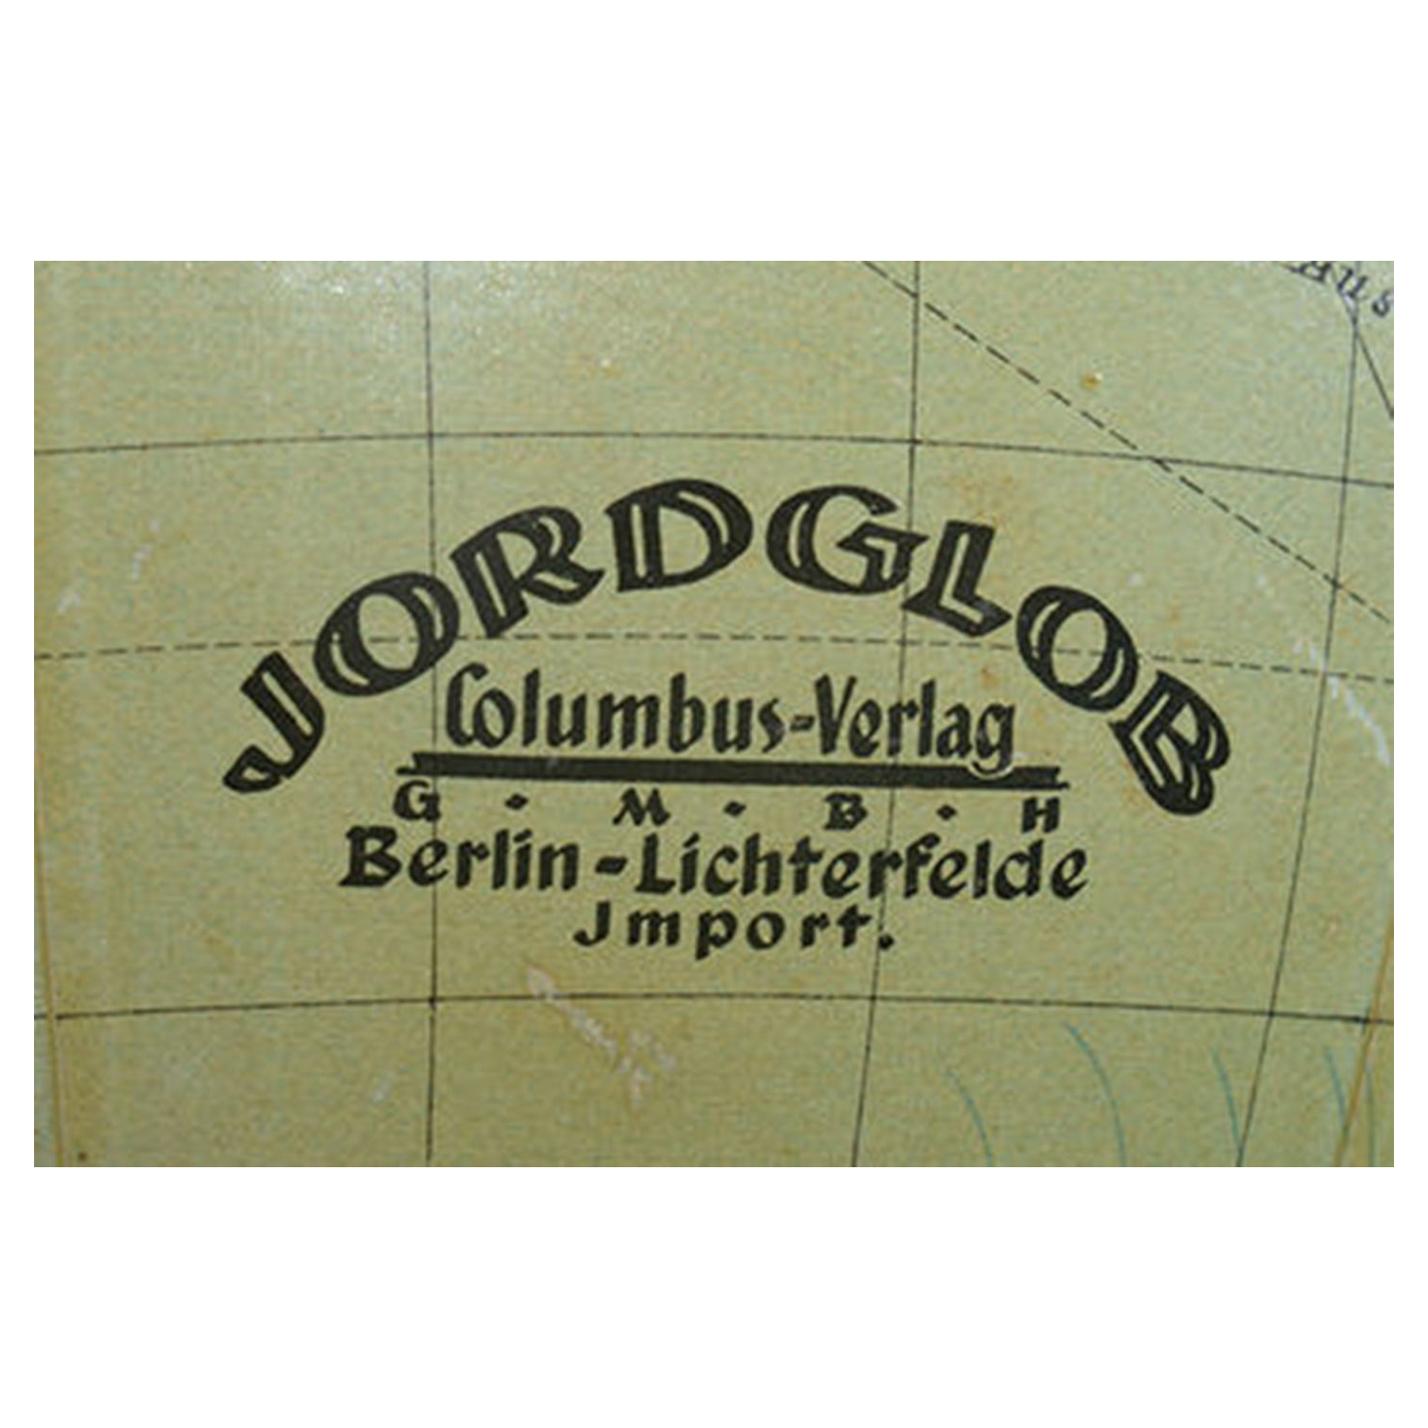 A good quality globe by the well respected and sort after maker, Columbus Jordglob. The globe has a brass support and a wooden base.
The text printed on the globe is in Swiss.

 